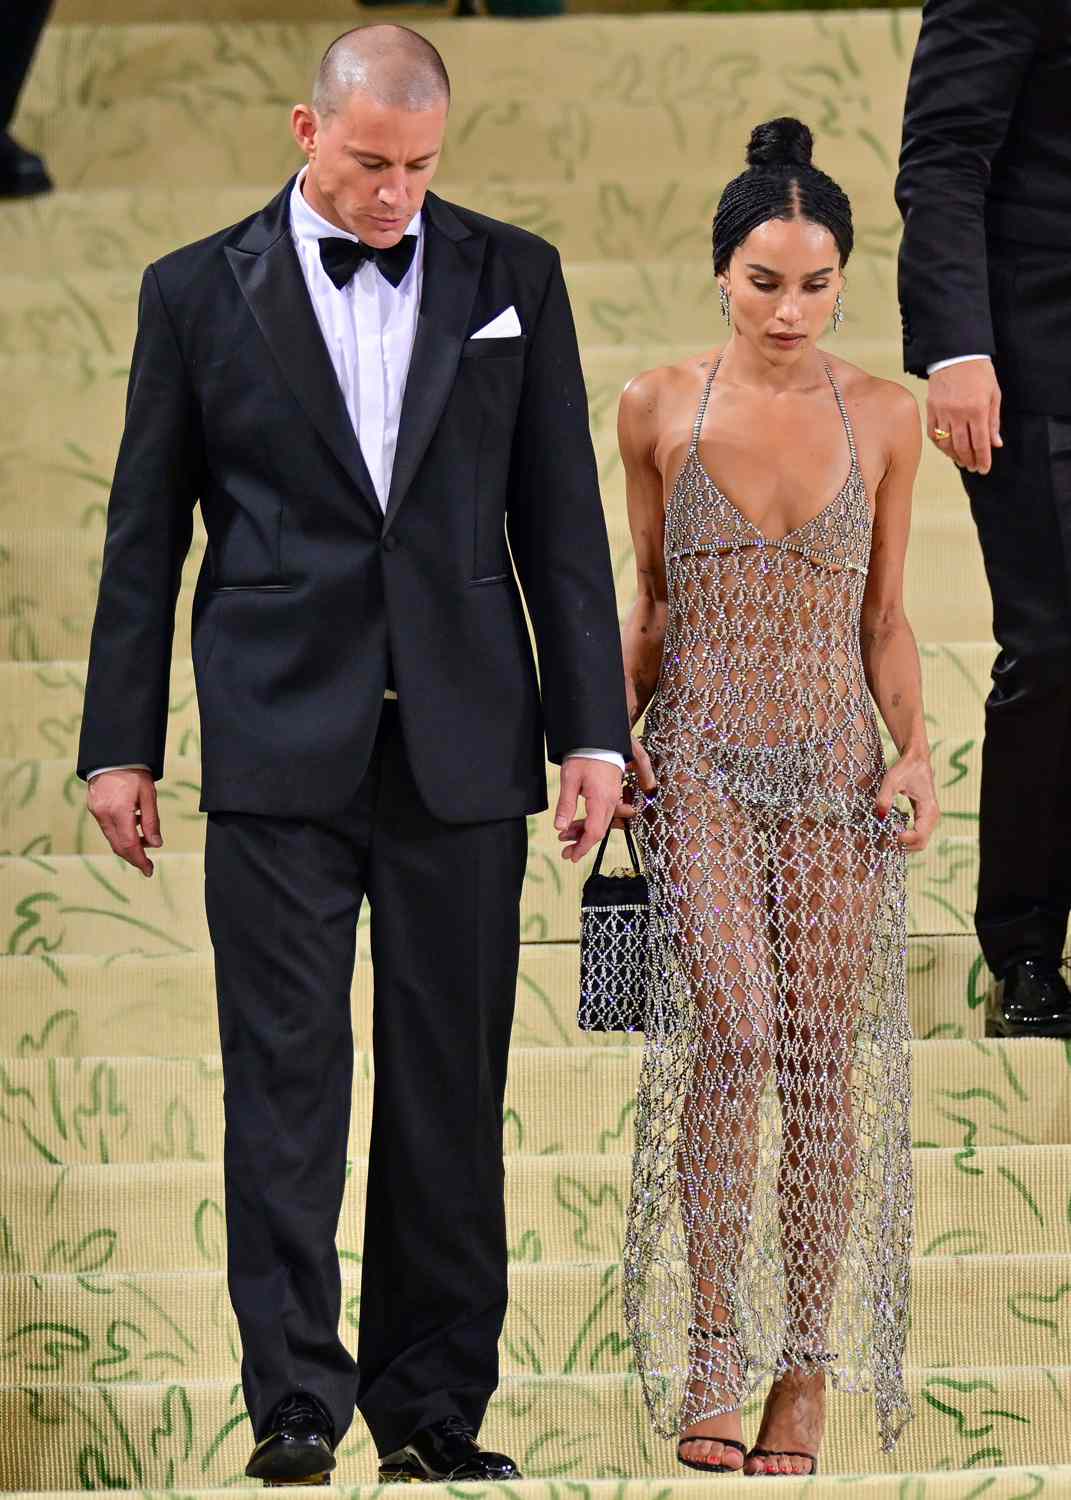 Channing Tatum and Zoe Kravitz leave the 2021 Met Gala Celebrating In America: A Lexicon Of Fashion at Metropolitan Museum of Art on September 13, 2021